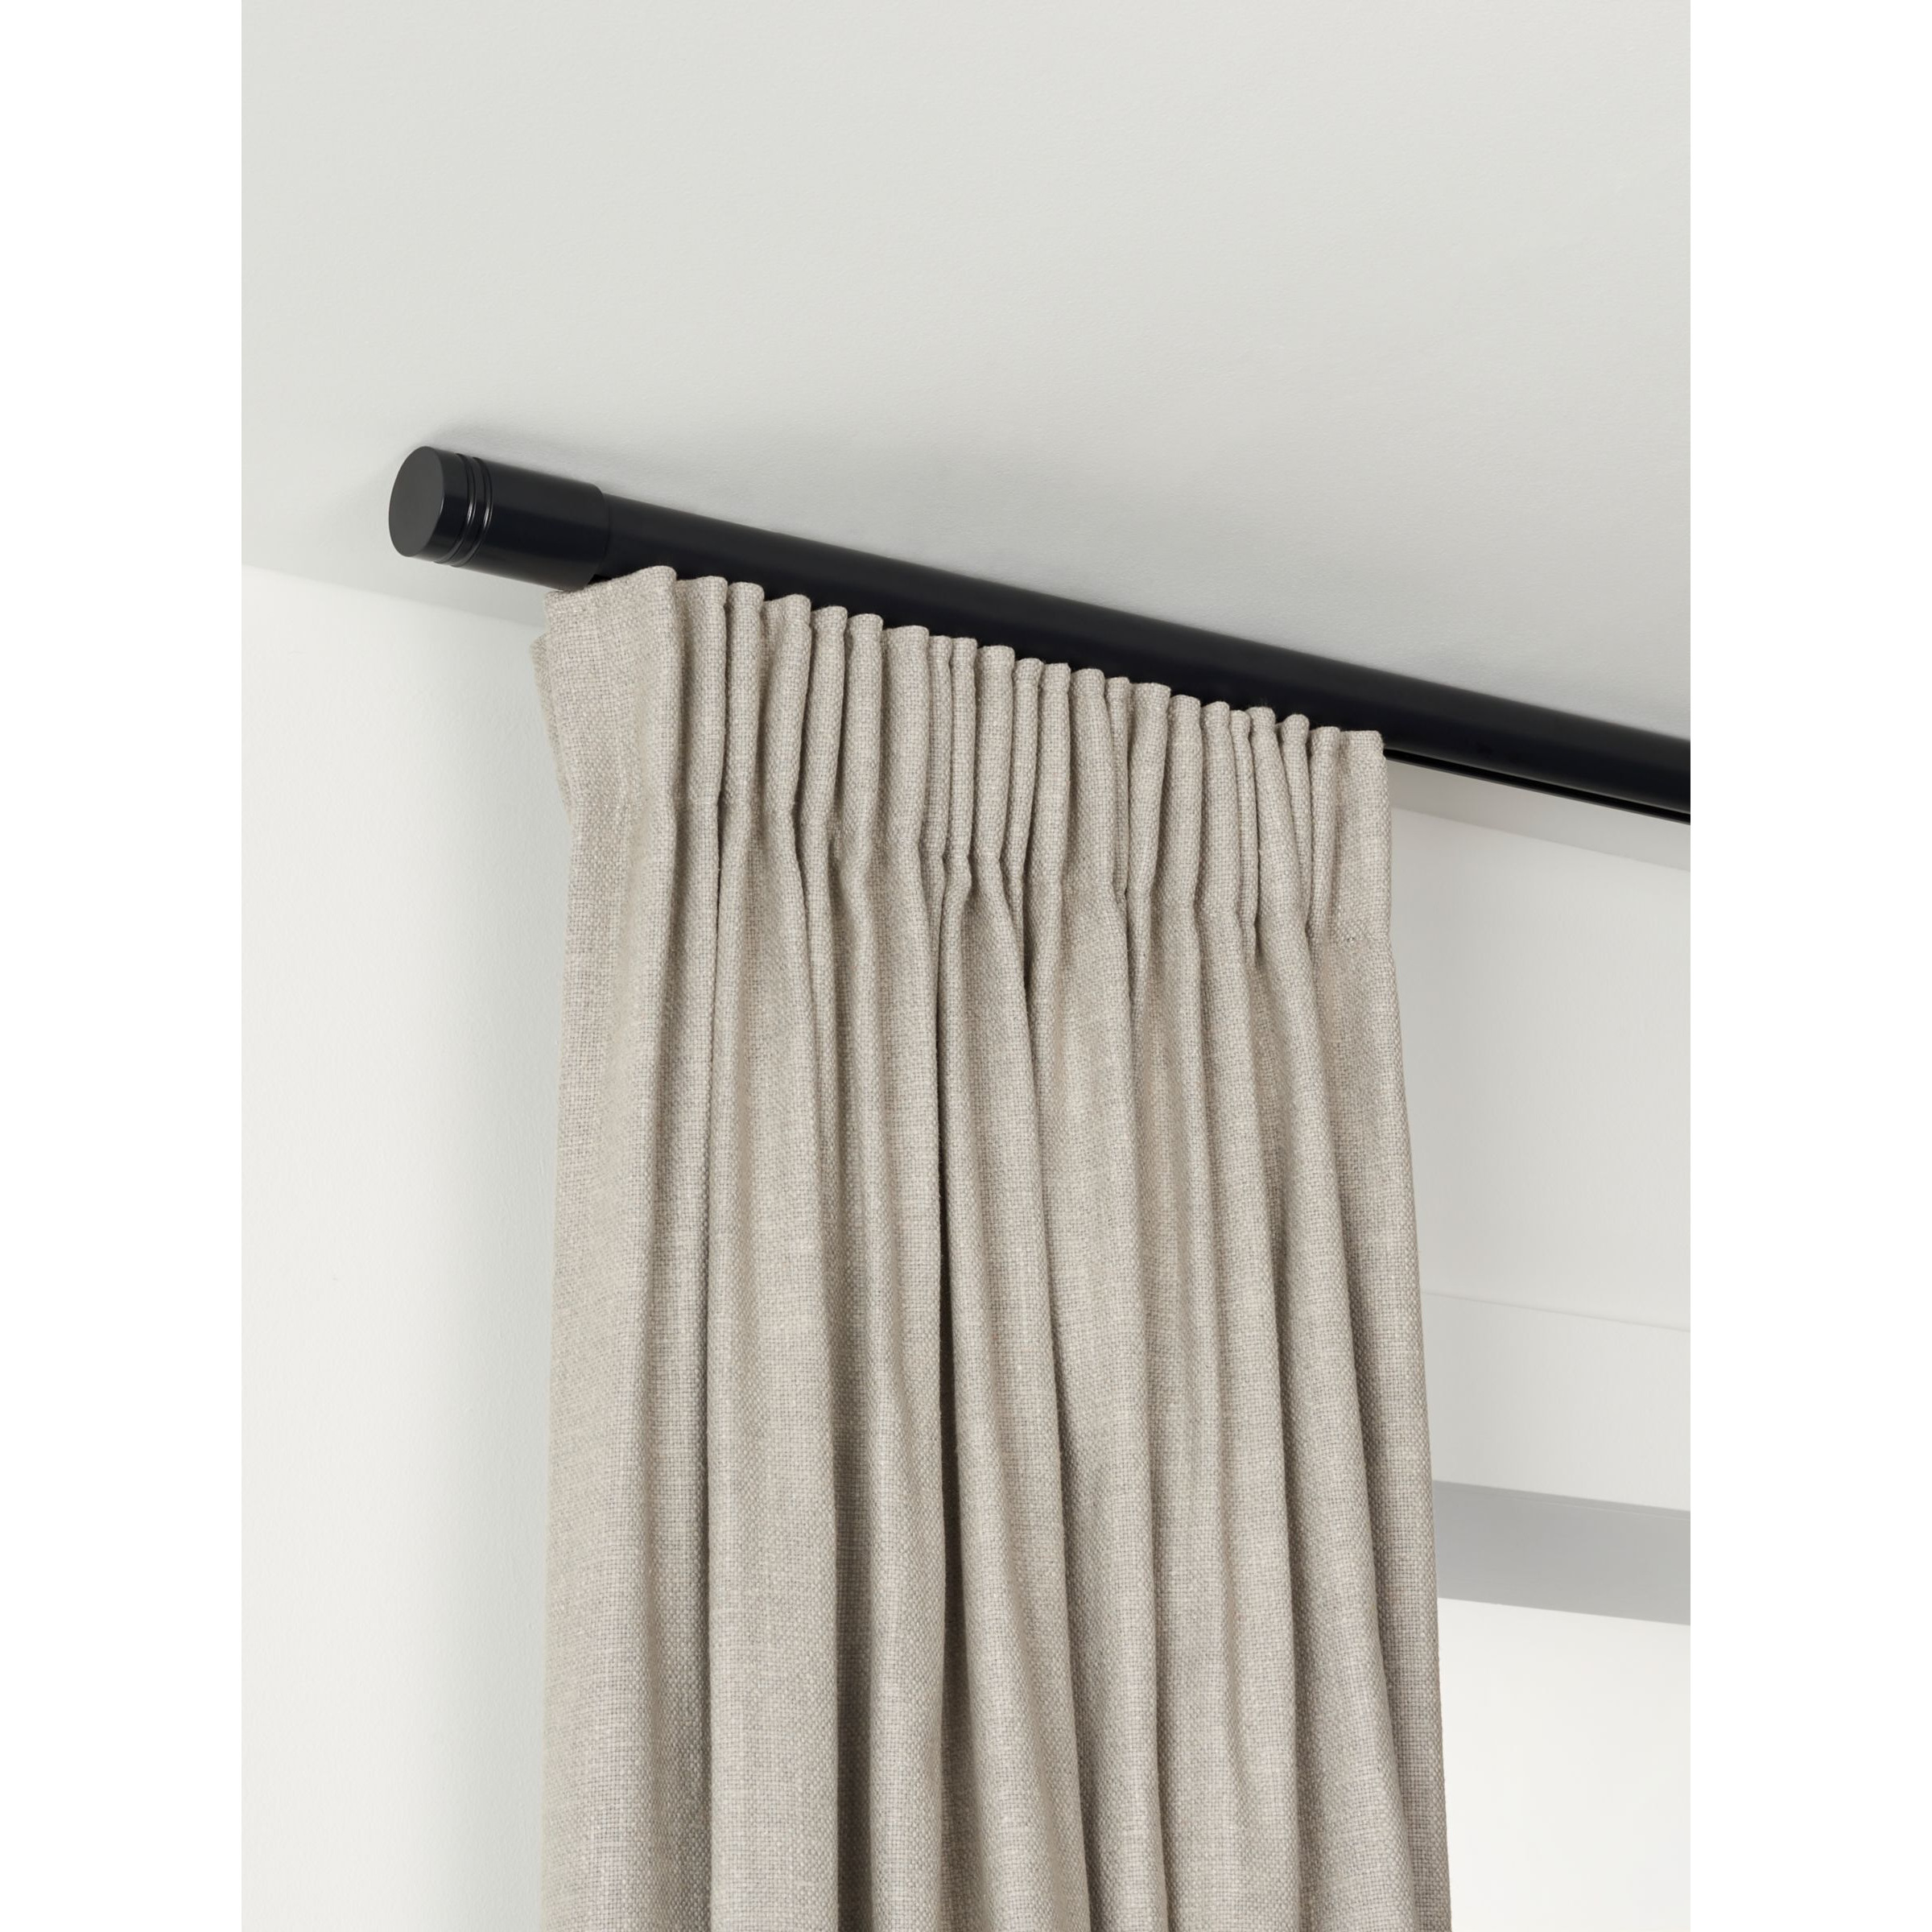 John Lewis Select Gliding Curtain Pole with Barrel Finial, Ceiling Fix, Dia.30mm - image 1